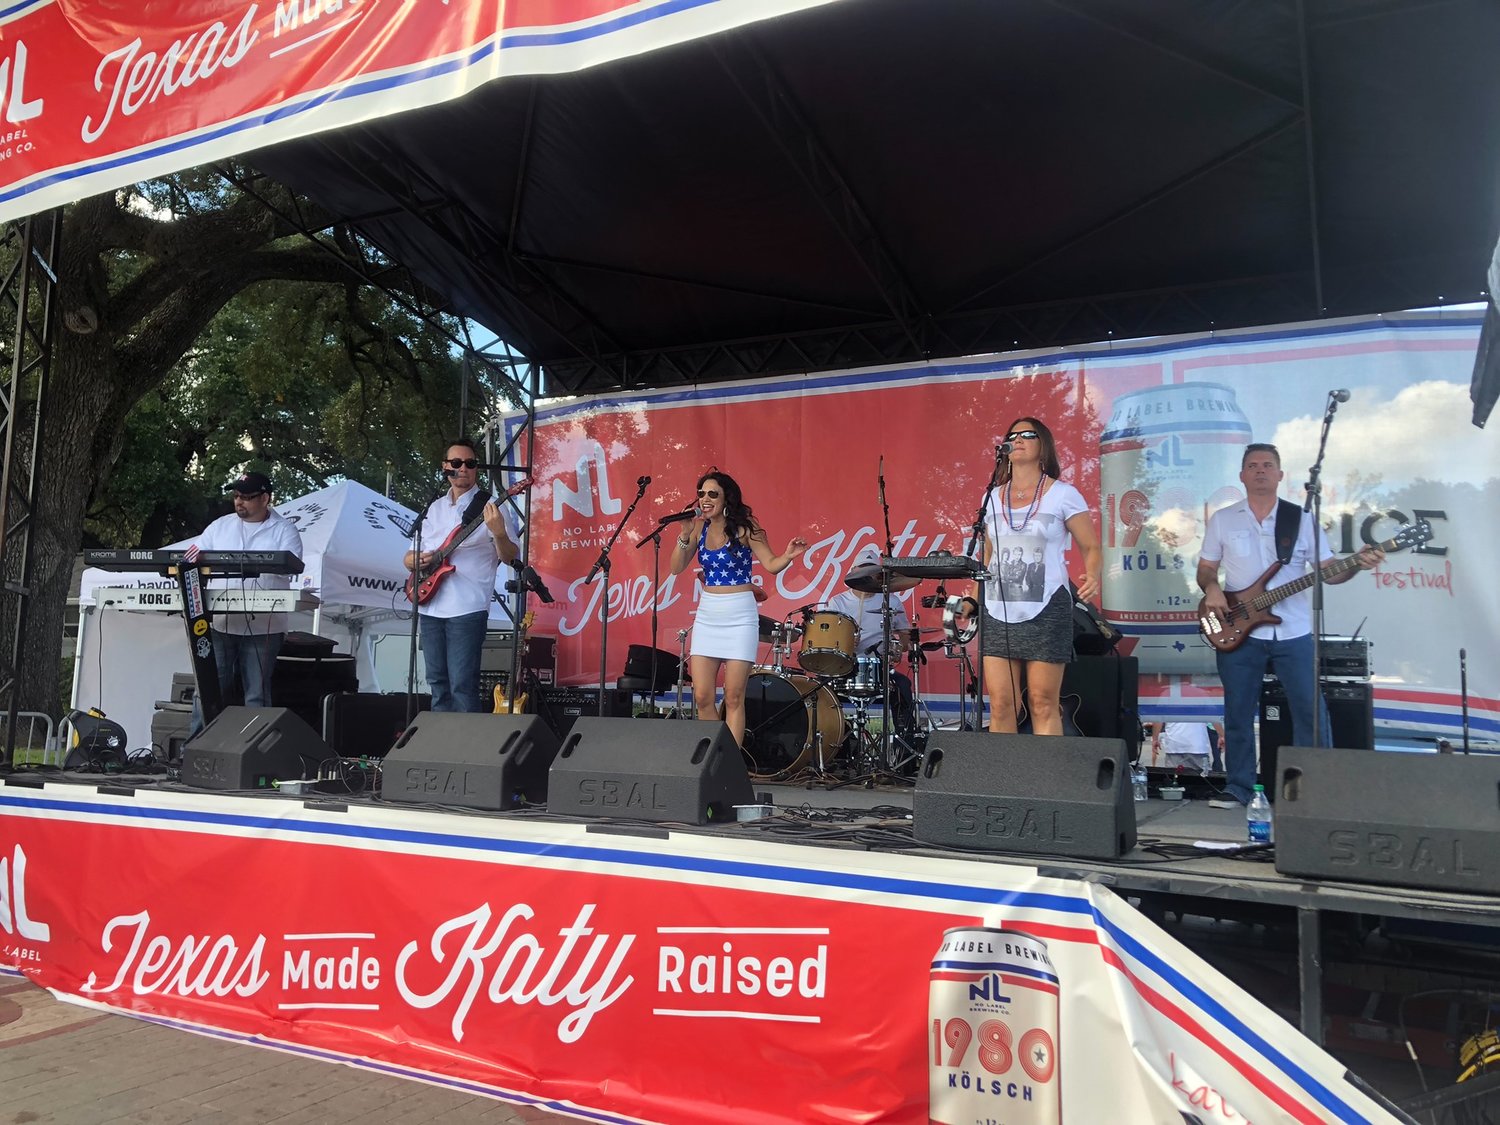 The Katy Rice Festival has gone virtual this year but will still feature music from local talent. Hayden Baker and Breakfast at Tiffany's will be featured as virtual concerts for the annual event.